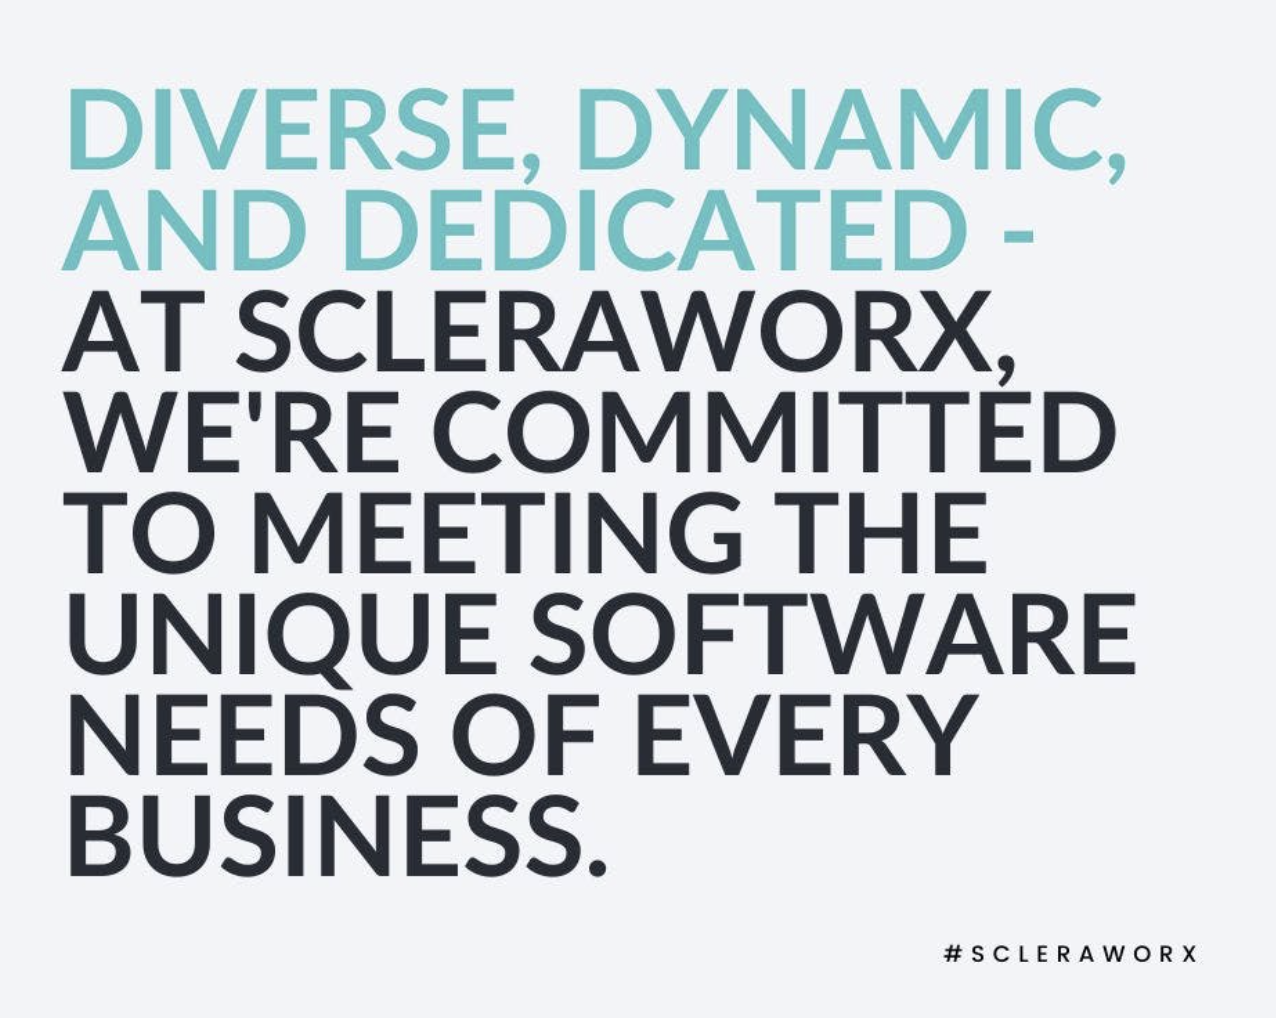 Infographic about Scleraworx’s commitment to serve a diverse client base